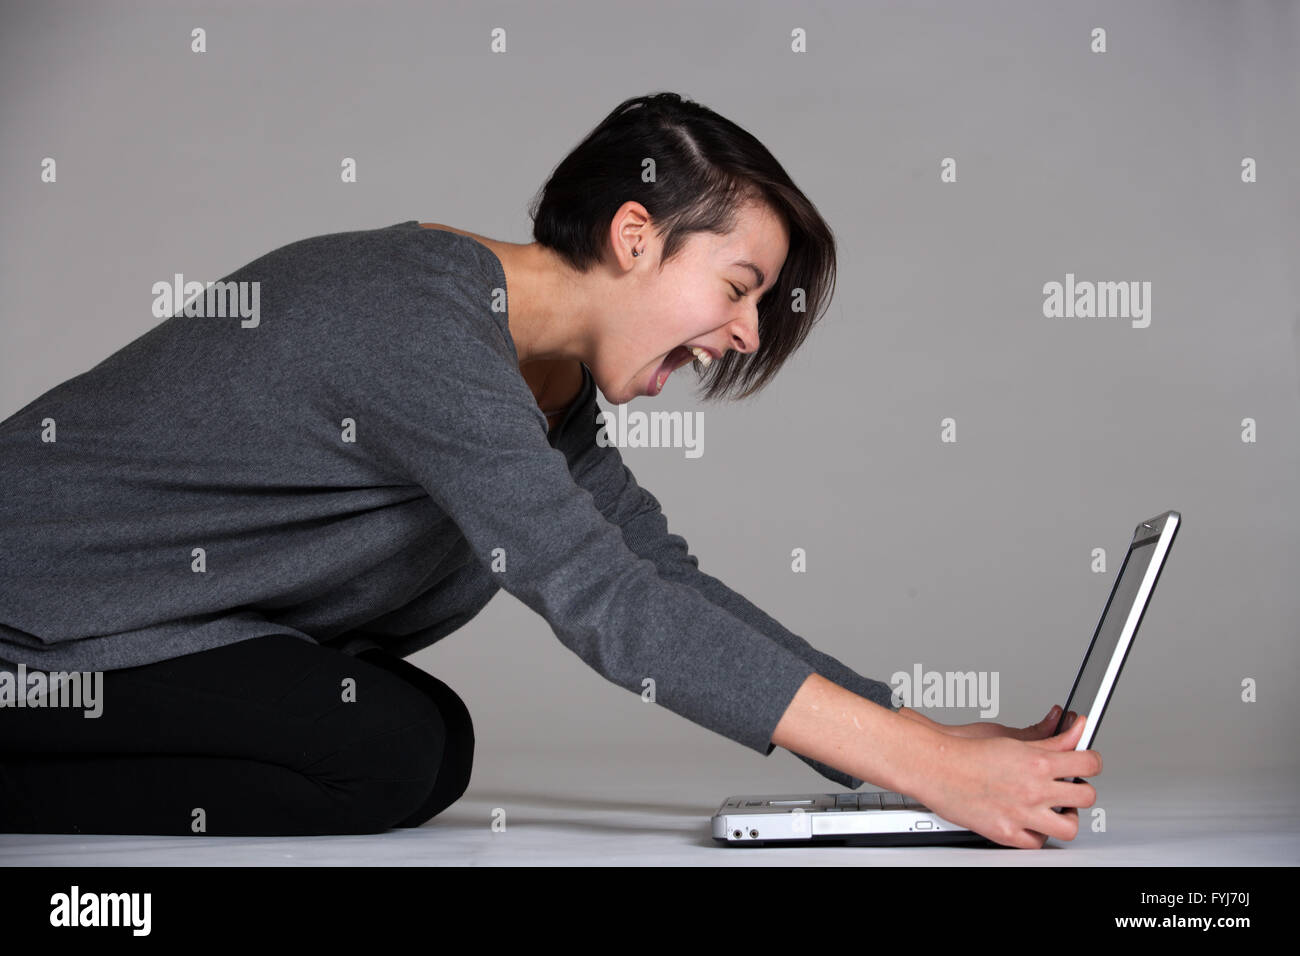 Young woman on floor with notebook Stock Photo